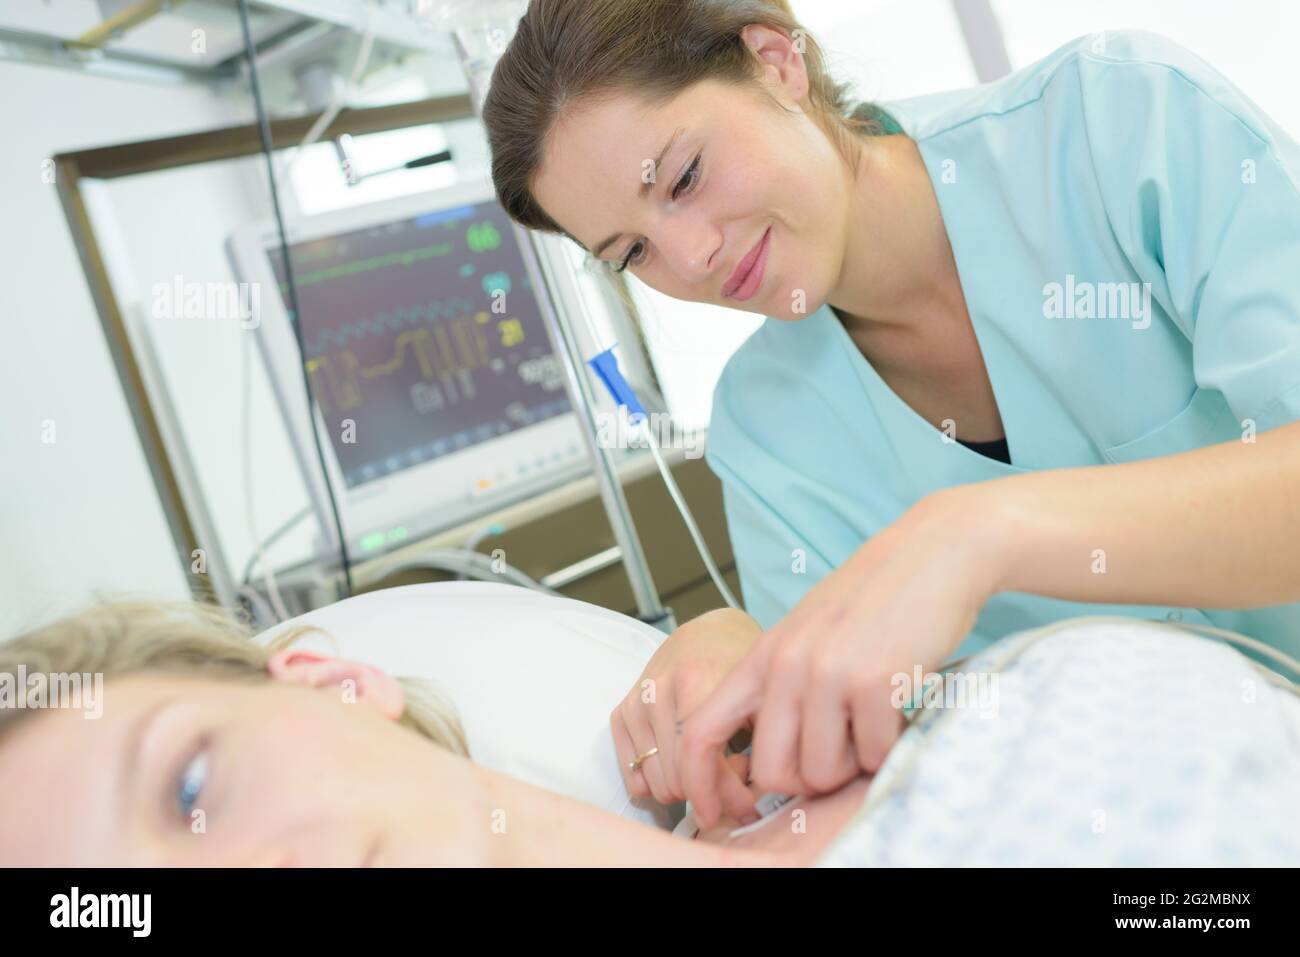 nurse tending to patients neck perfusion Stock Photo